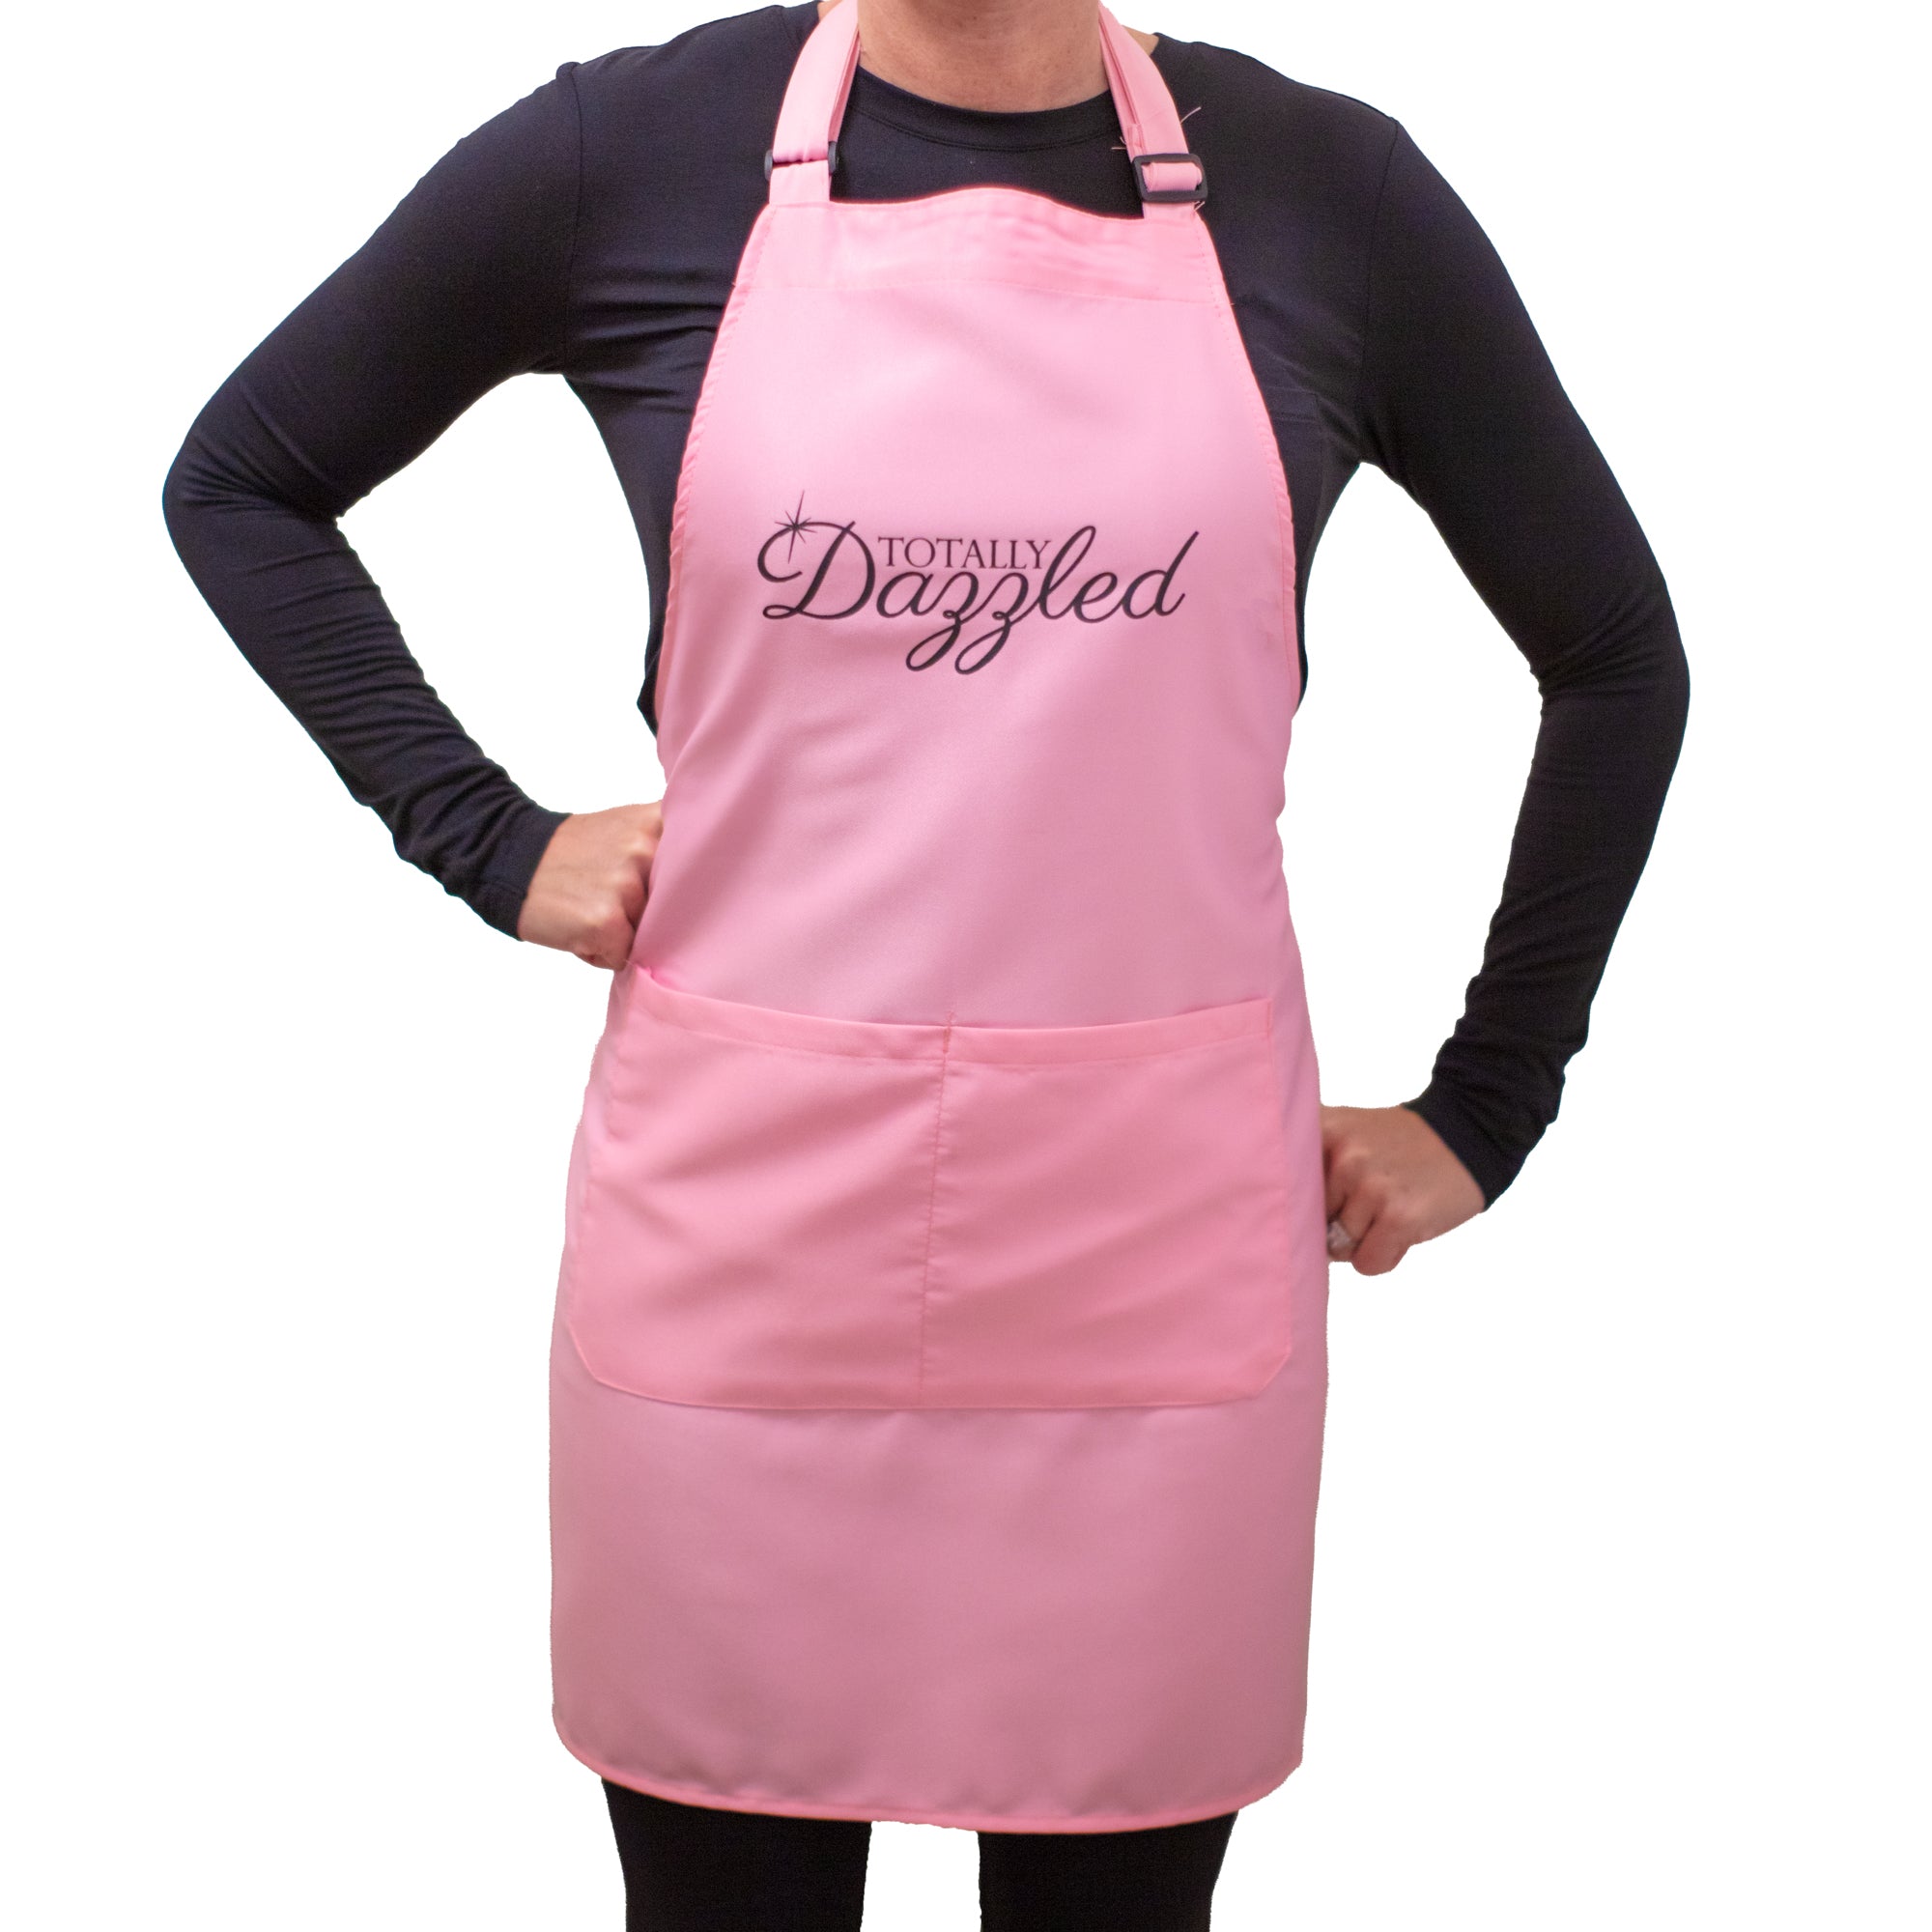 Totally Dazzled Crafting Apron